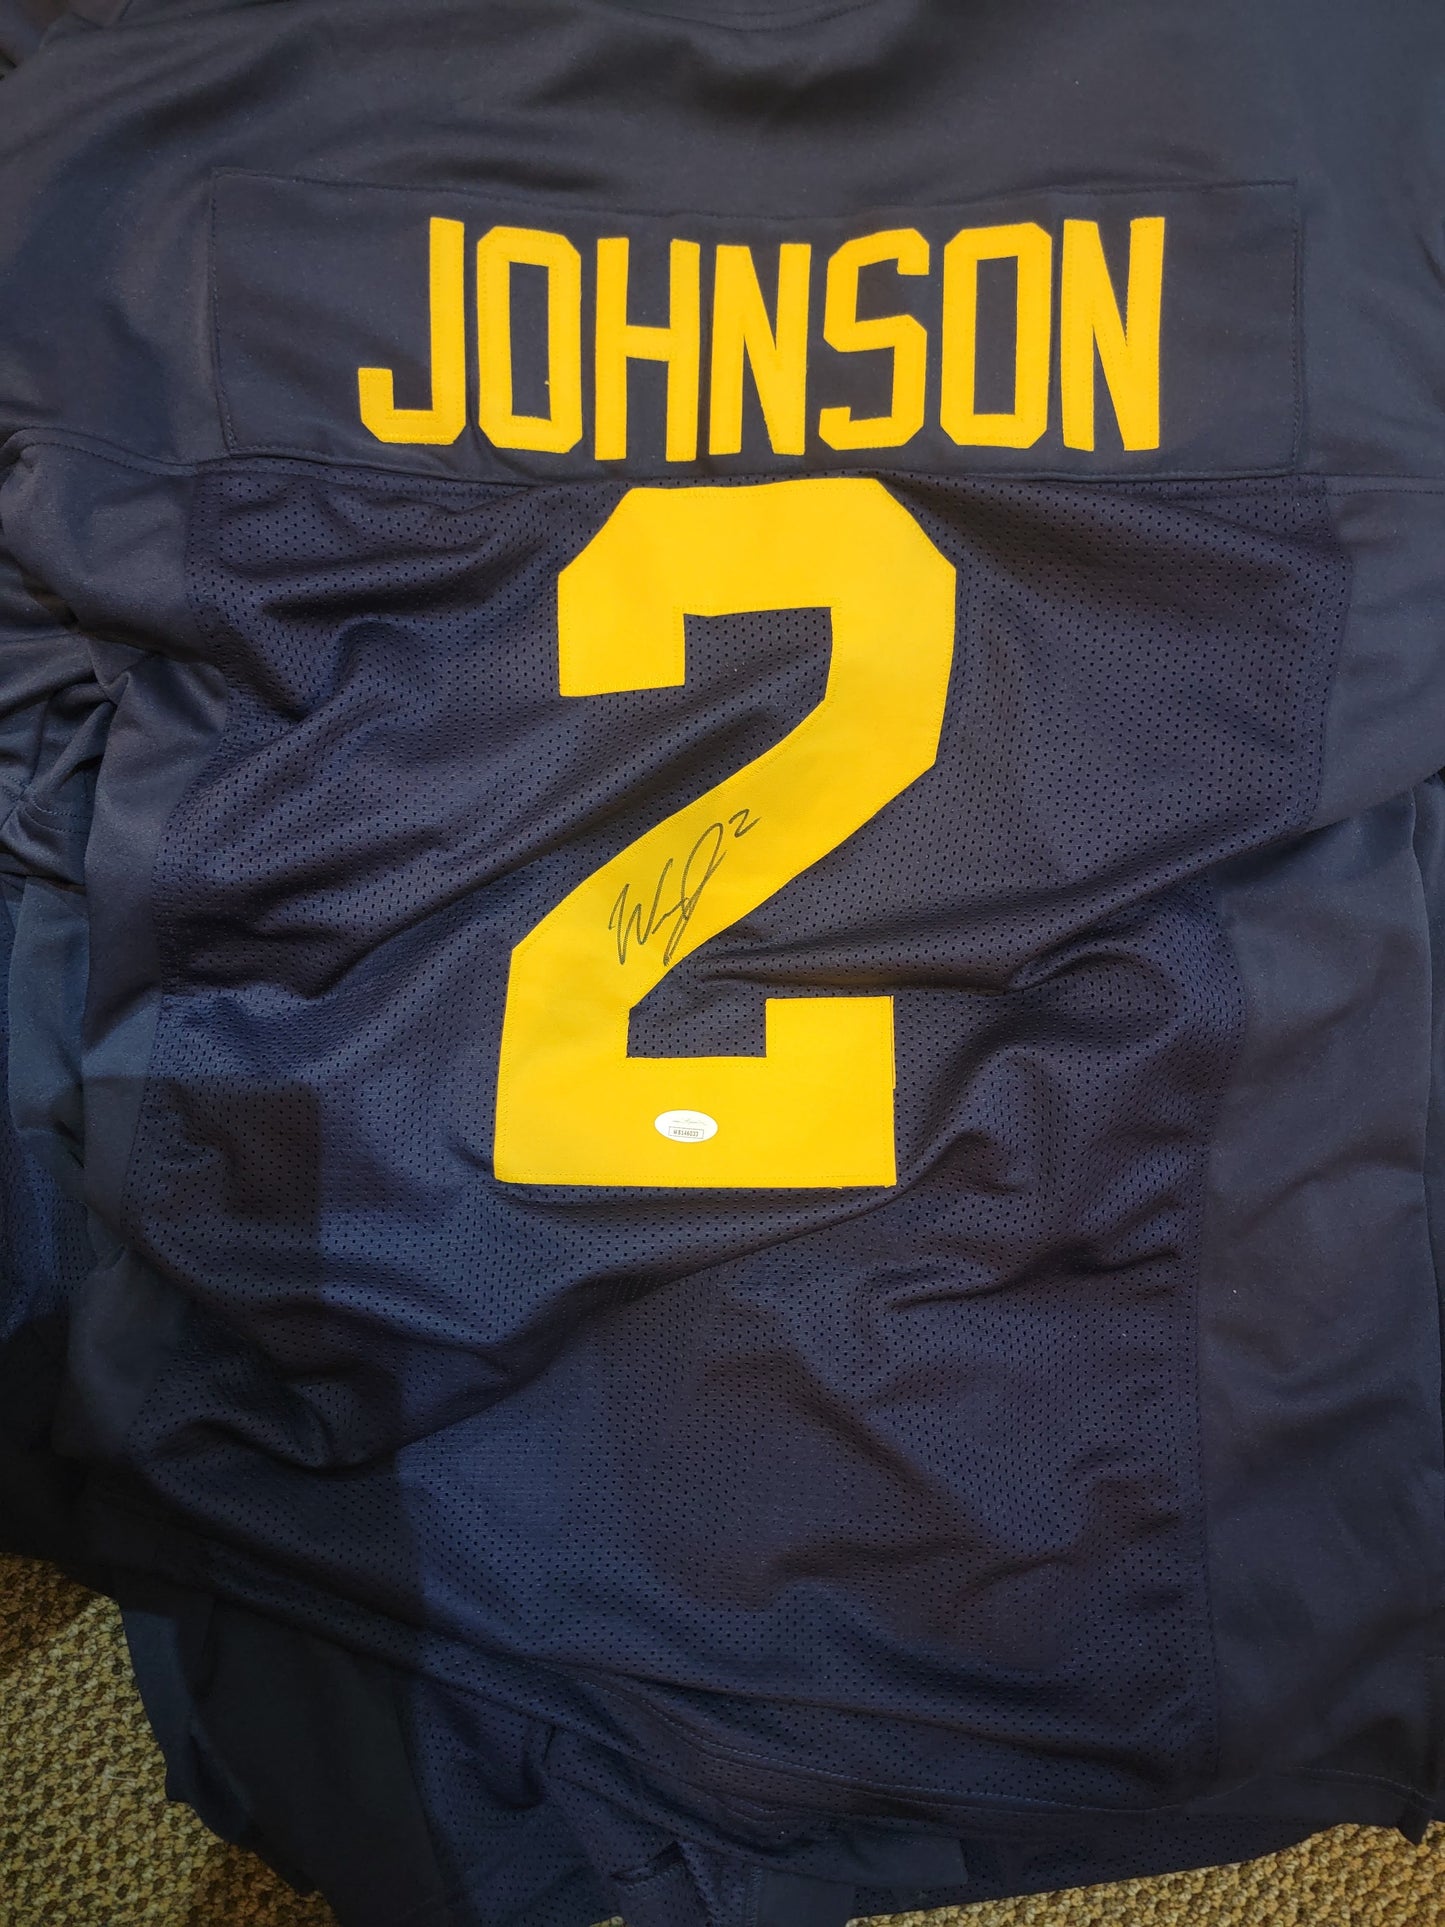 Will Johnson Michigan Wolverines autographed jersey